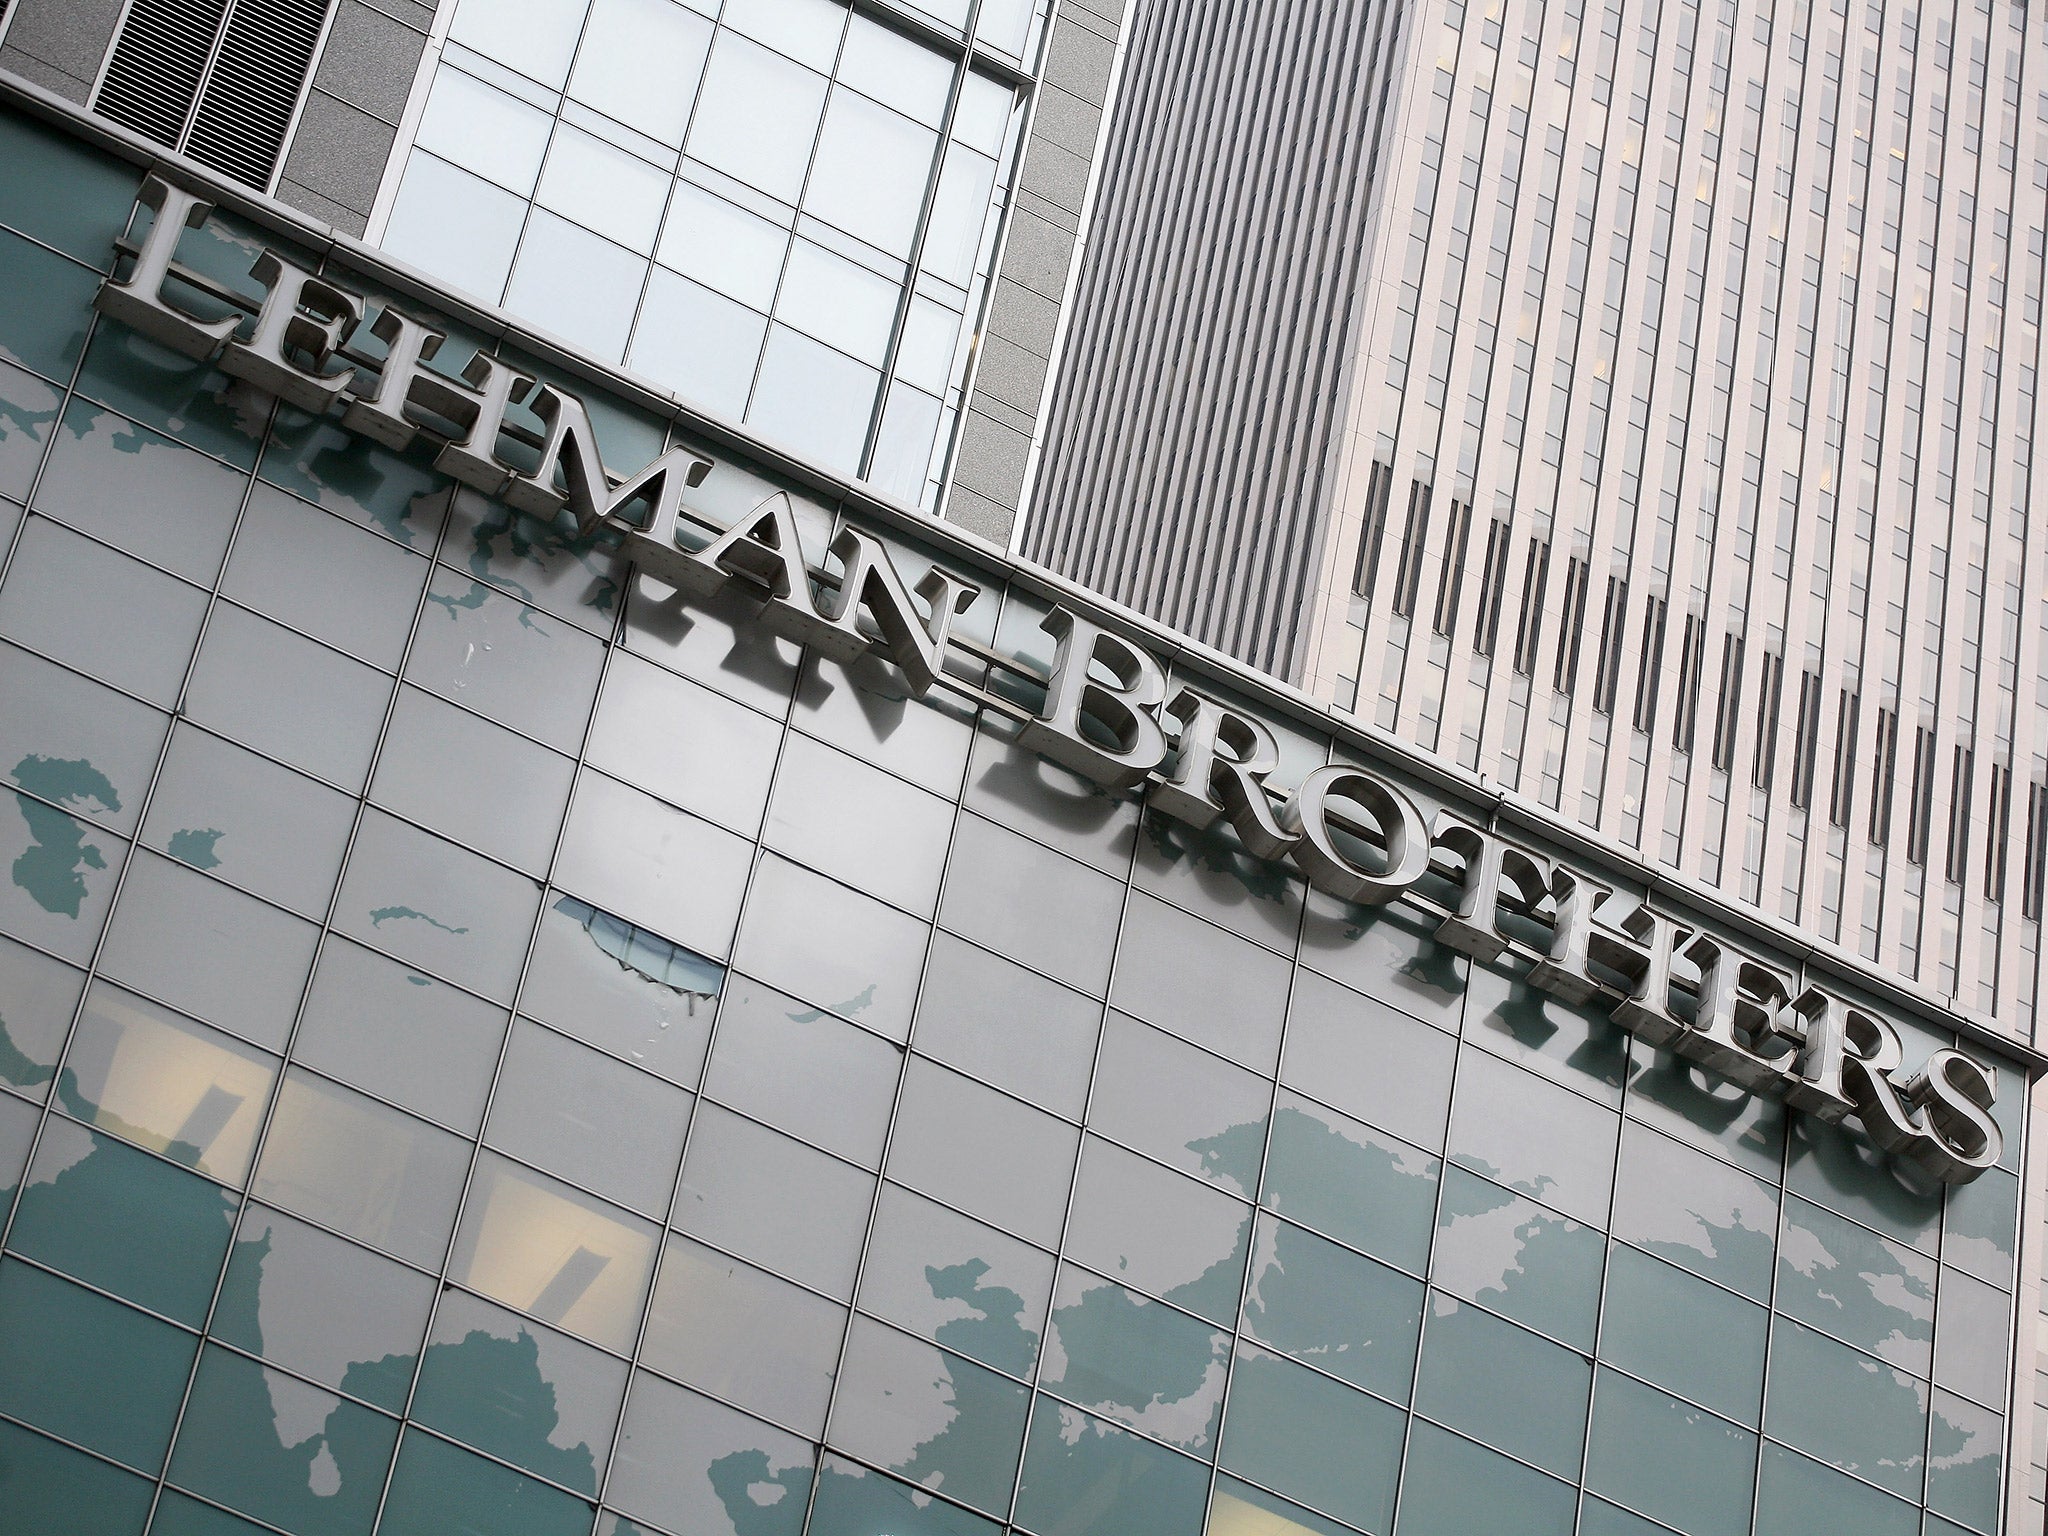 The trustees of the Lehman Brothers estate say that Jonathan Hoffman is trying to get paid twice